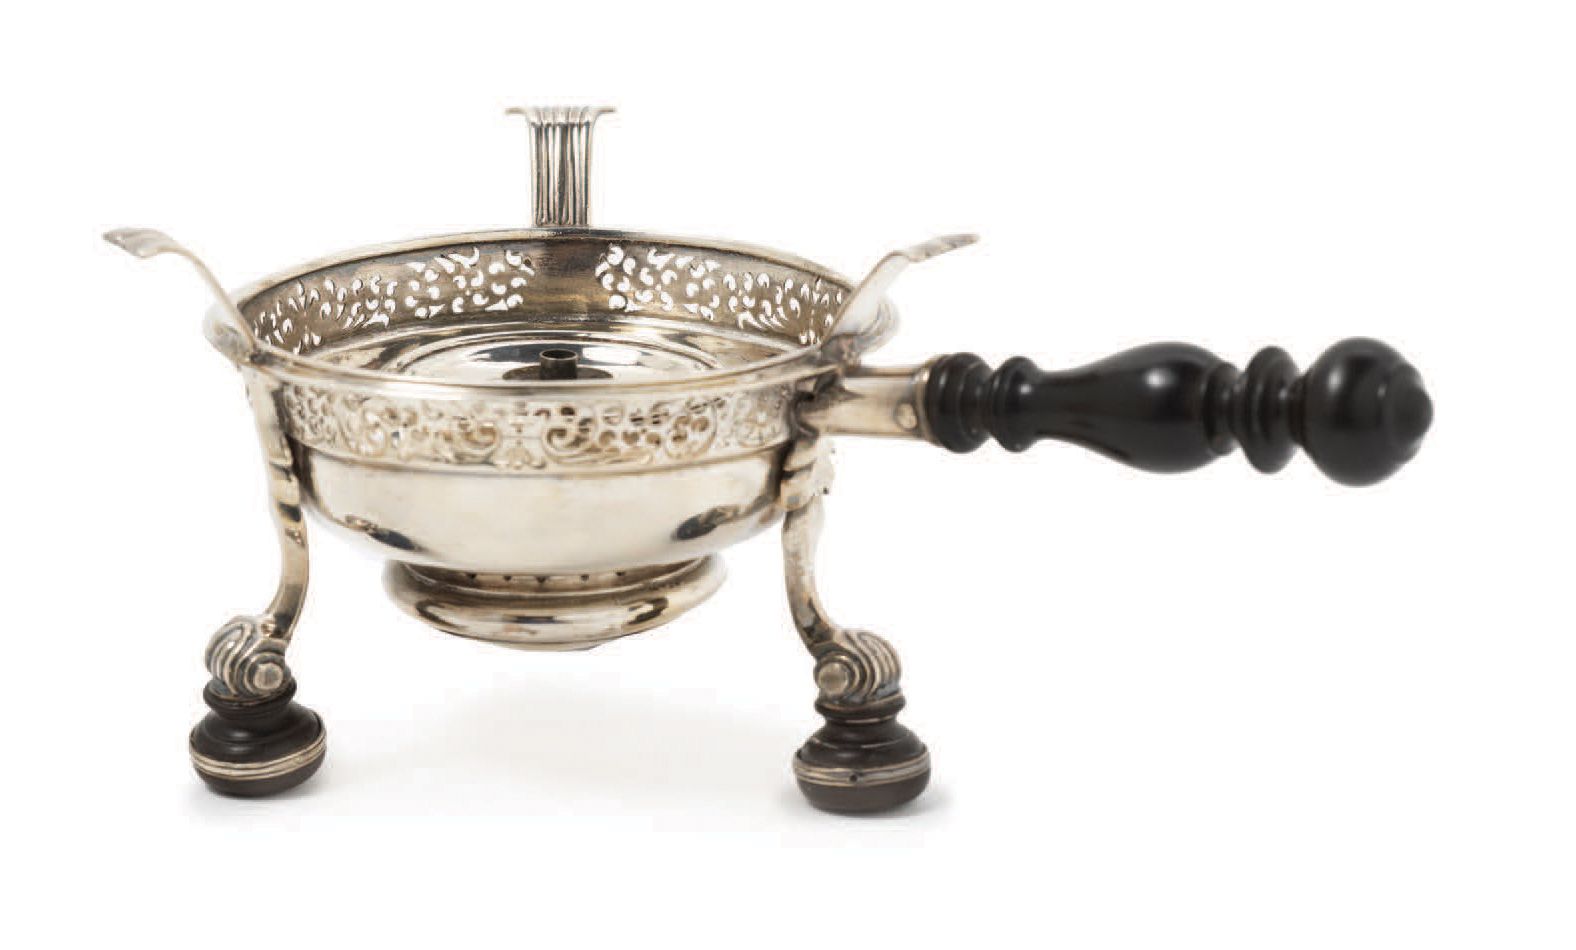 Null SILVER HEATER Antwerp, early 18th century
This dish warmer is provided with&hellip;